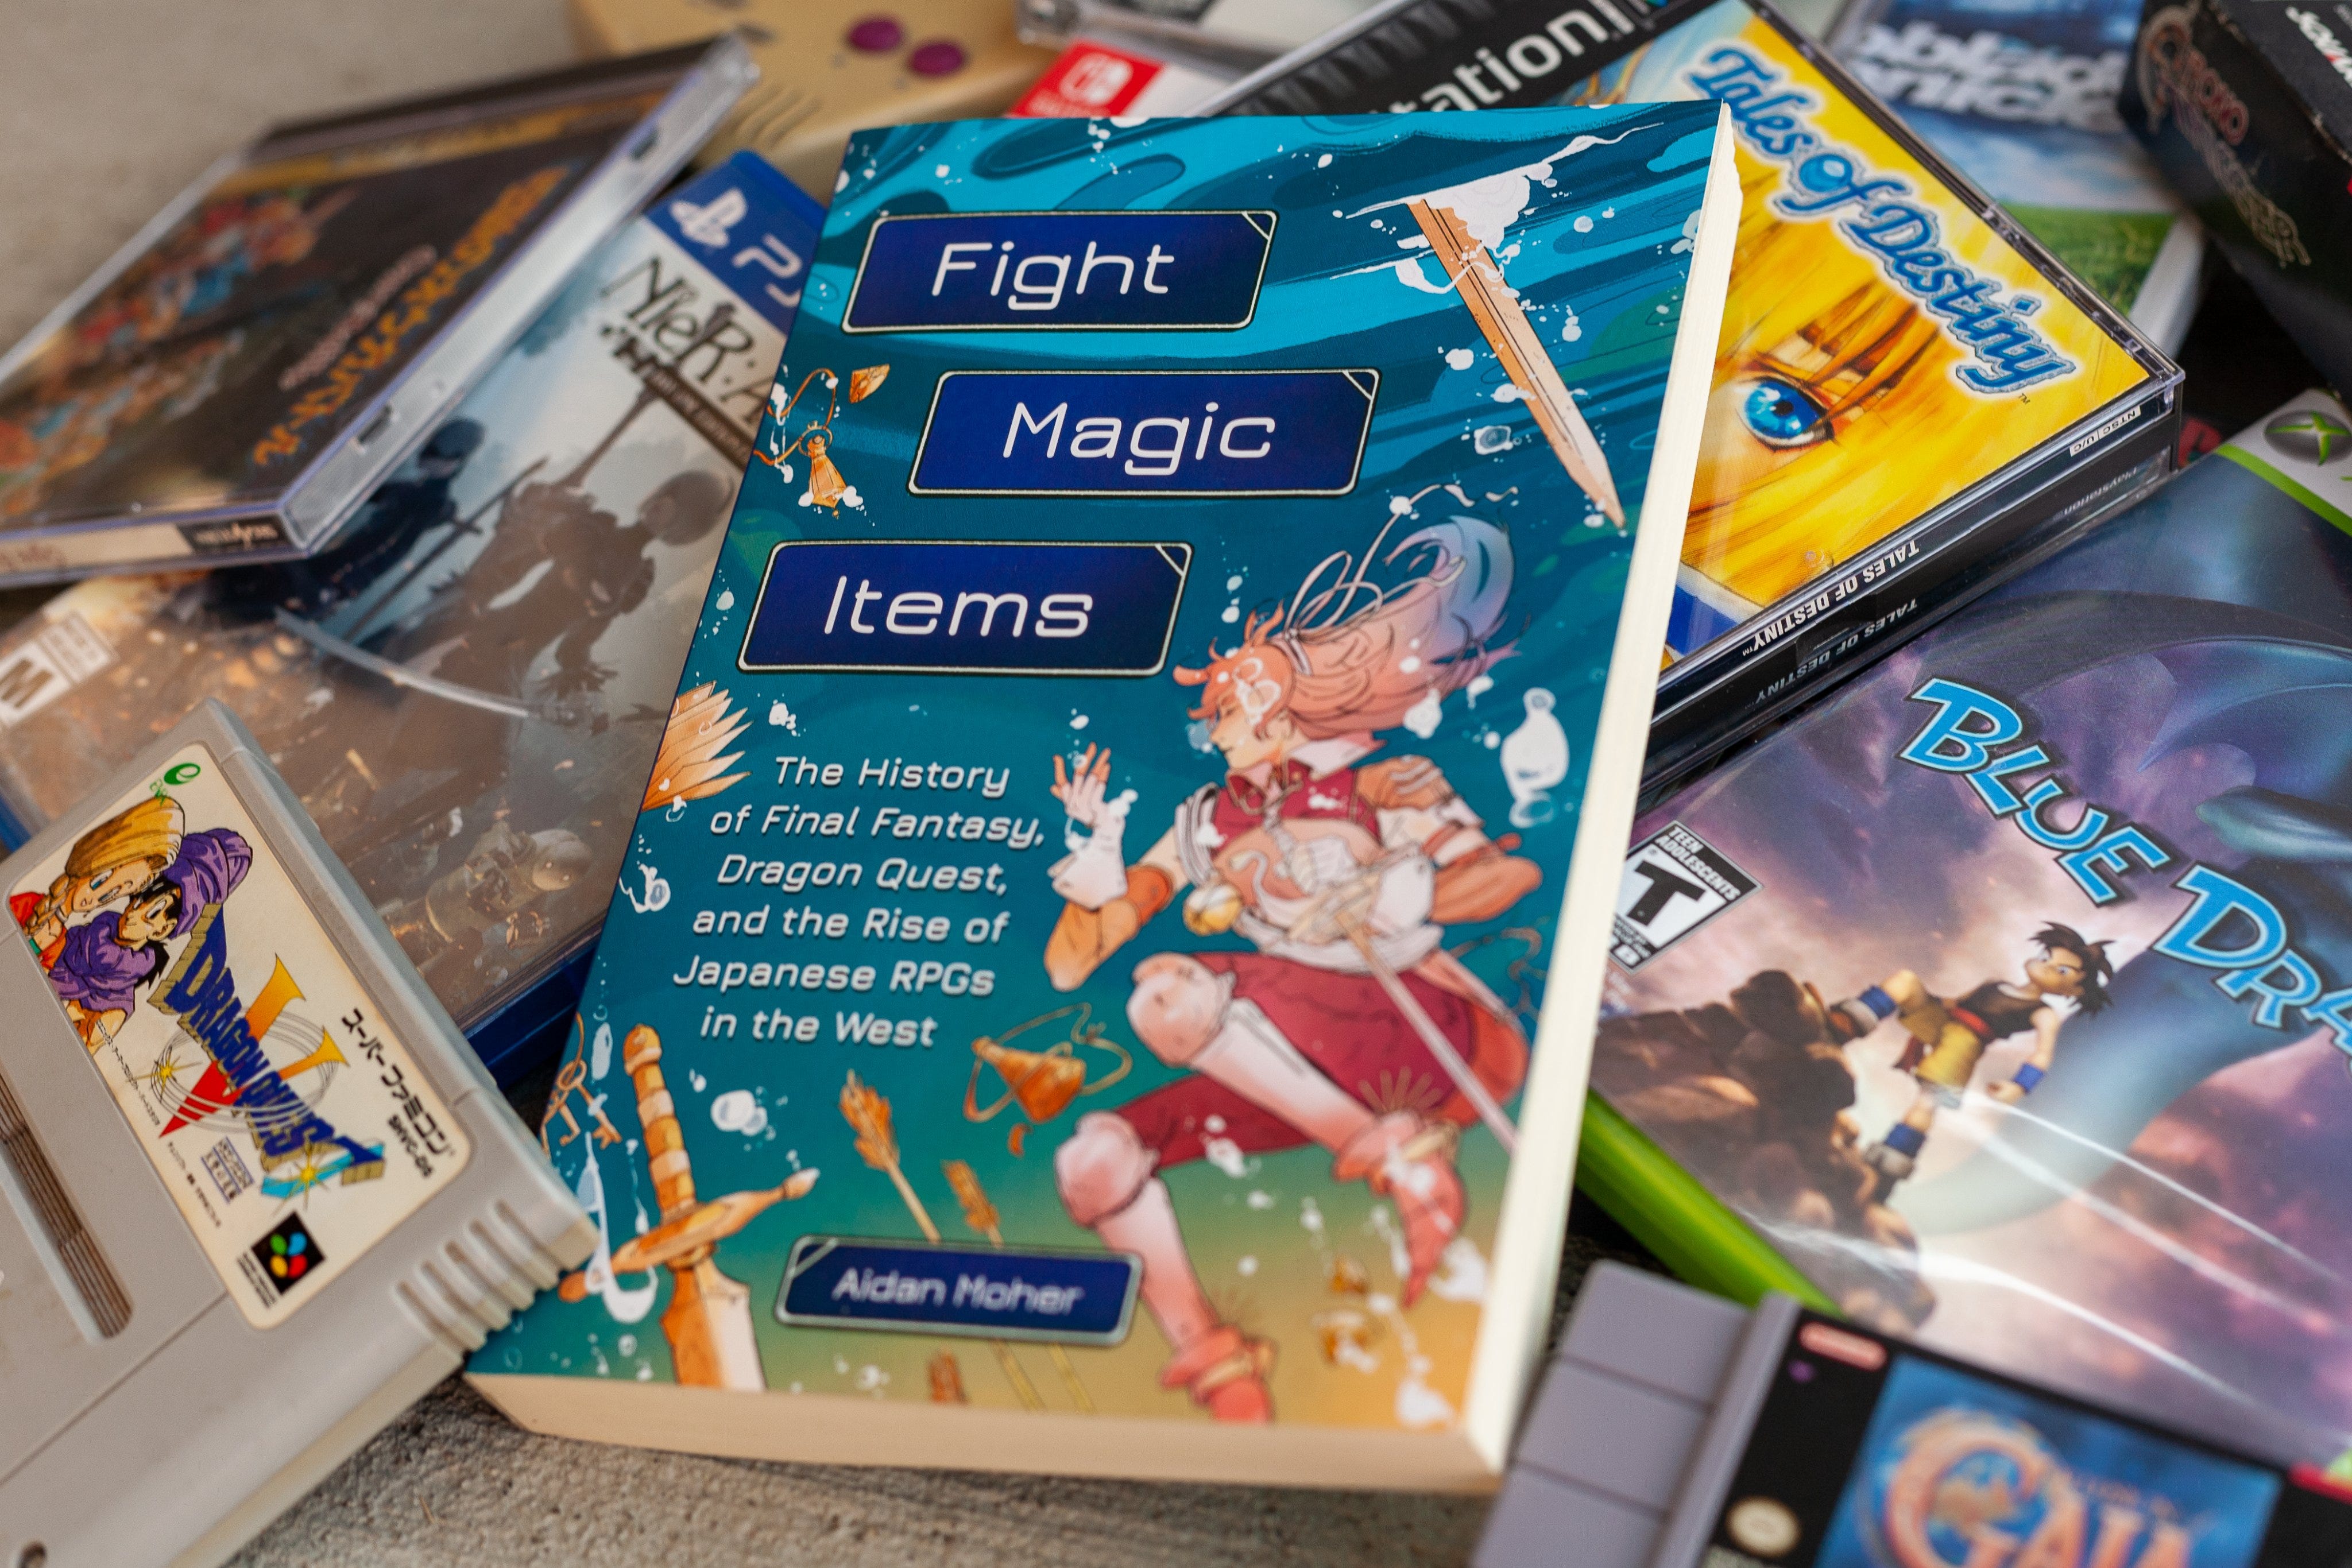 Aidan Moher's Fight, Magic, Items is featured nestled among retro video games.